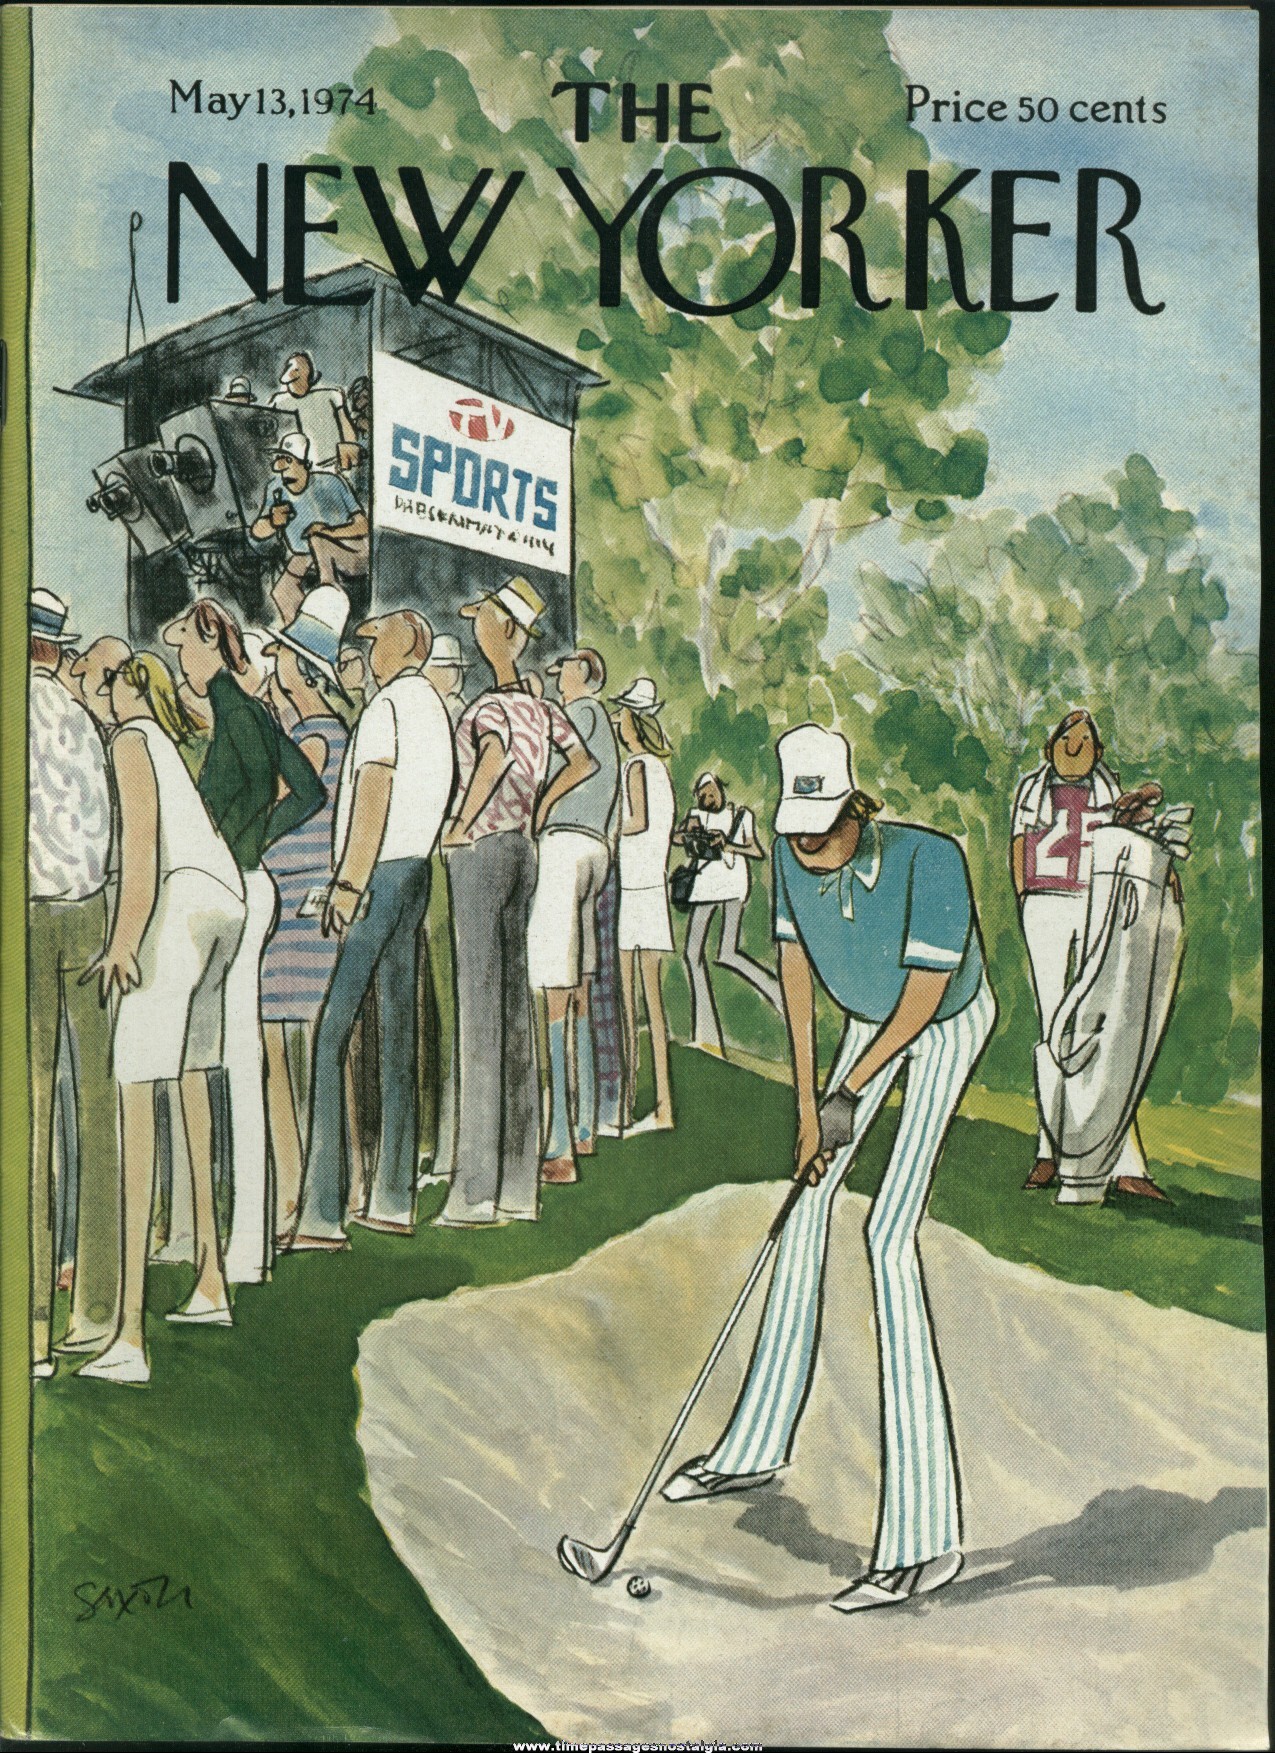 New Yorker Magazine - May 13, 1974 - Cover by Charles Saxon